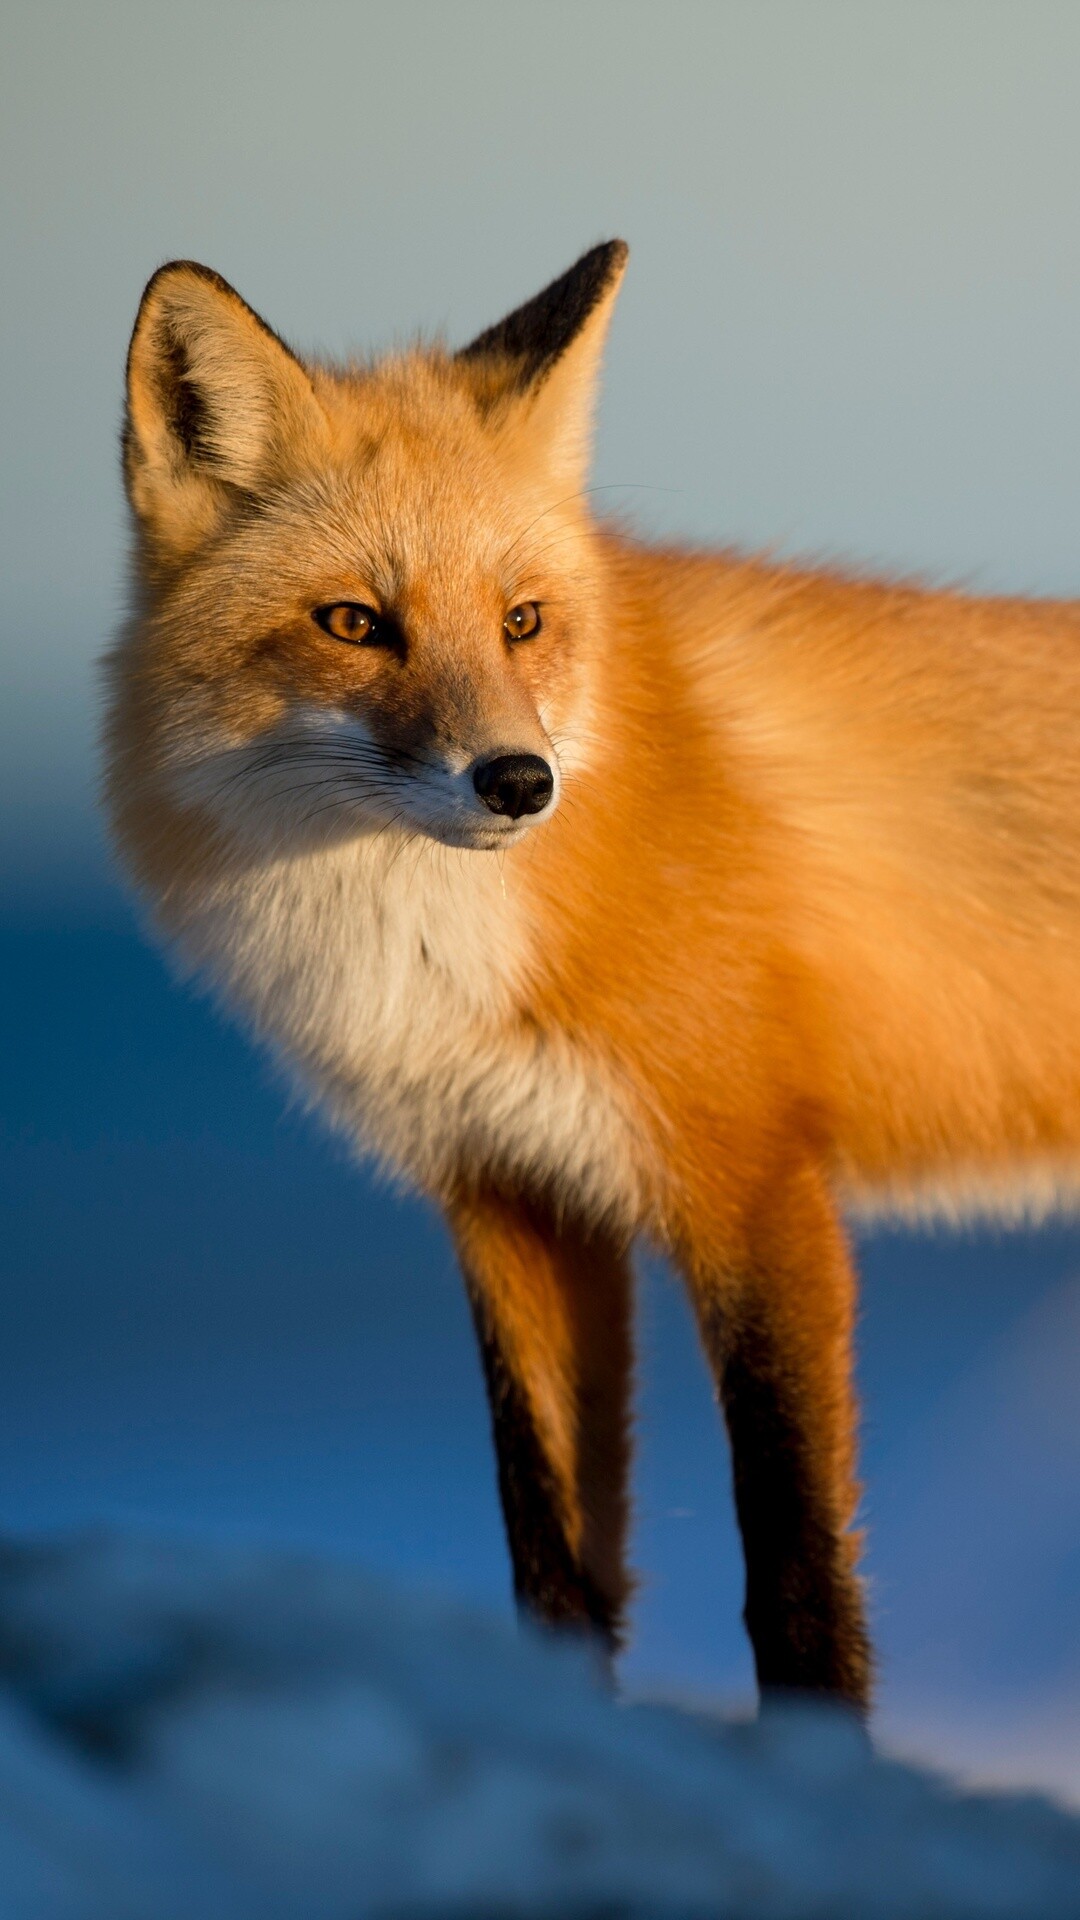 Fox: A mammal with reddish color with white under parts and a white-tipped tail. 1080x1920 Full HD Wallpaper.